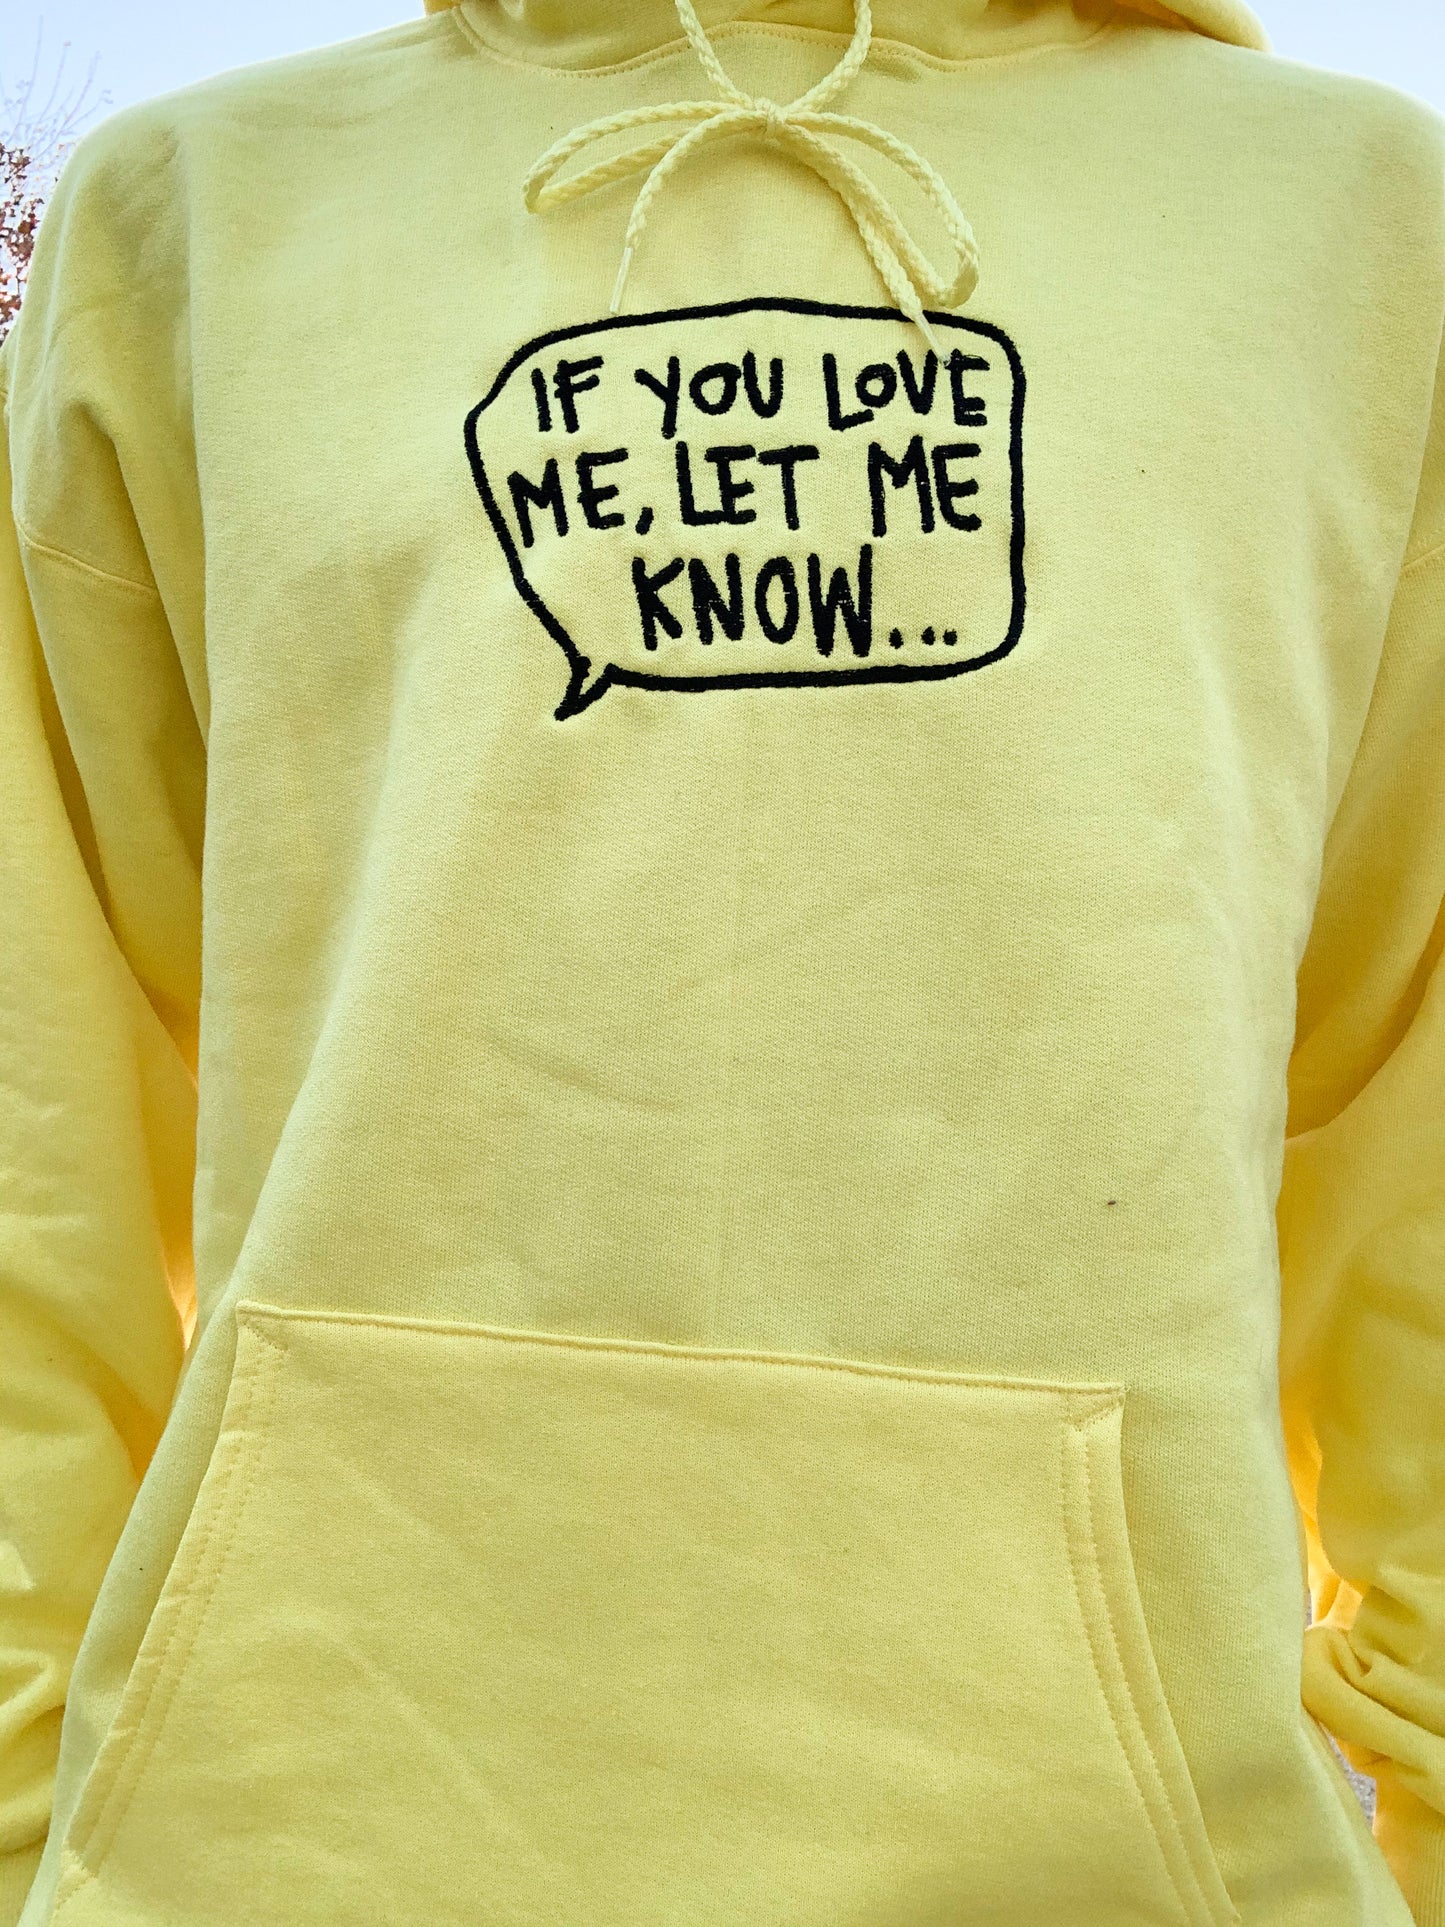 If you love me let me know Embroidered Yellow Hoodie